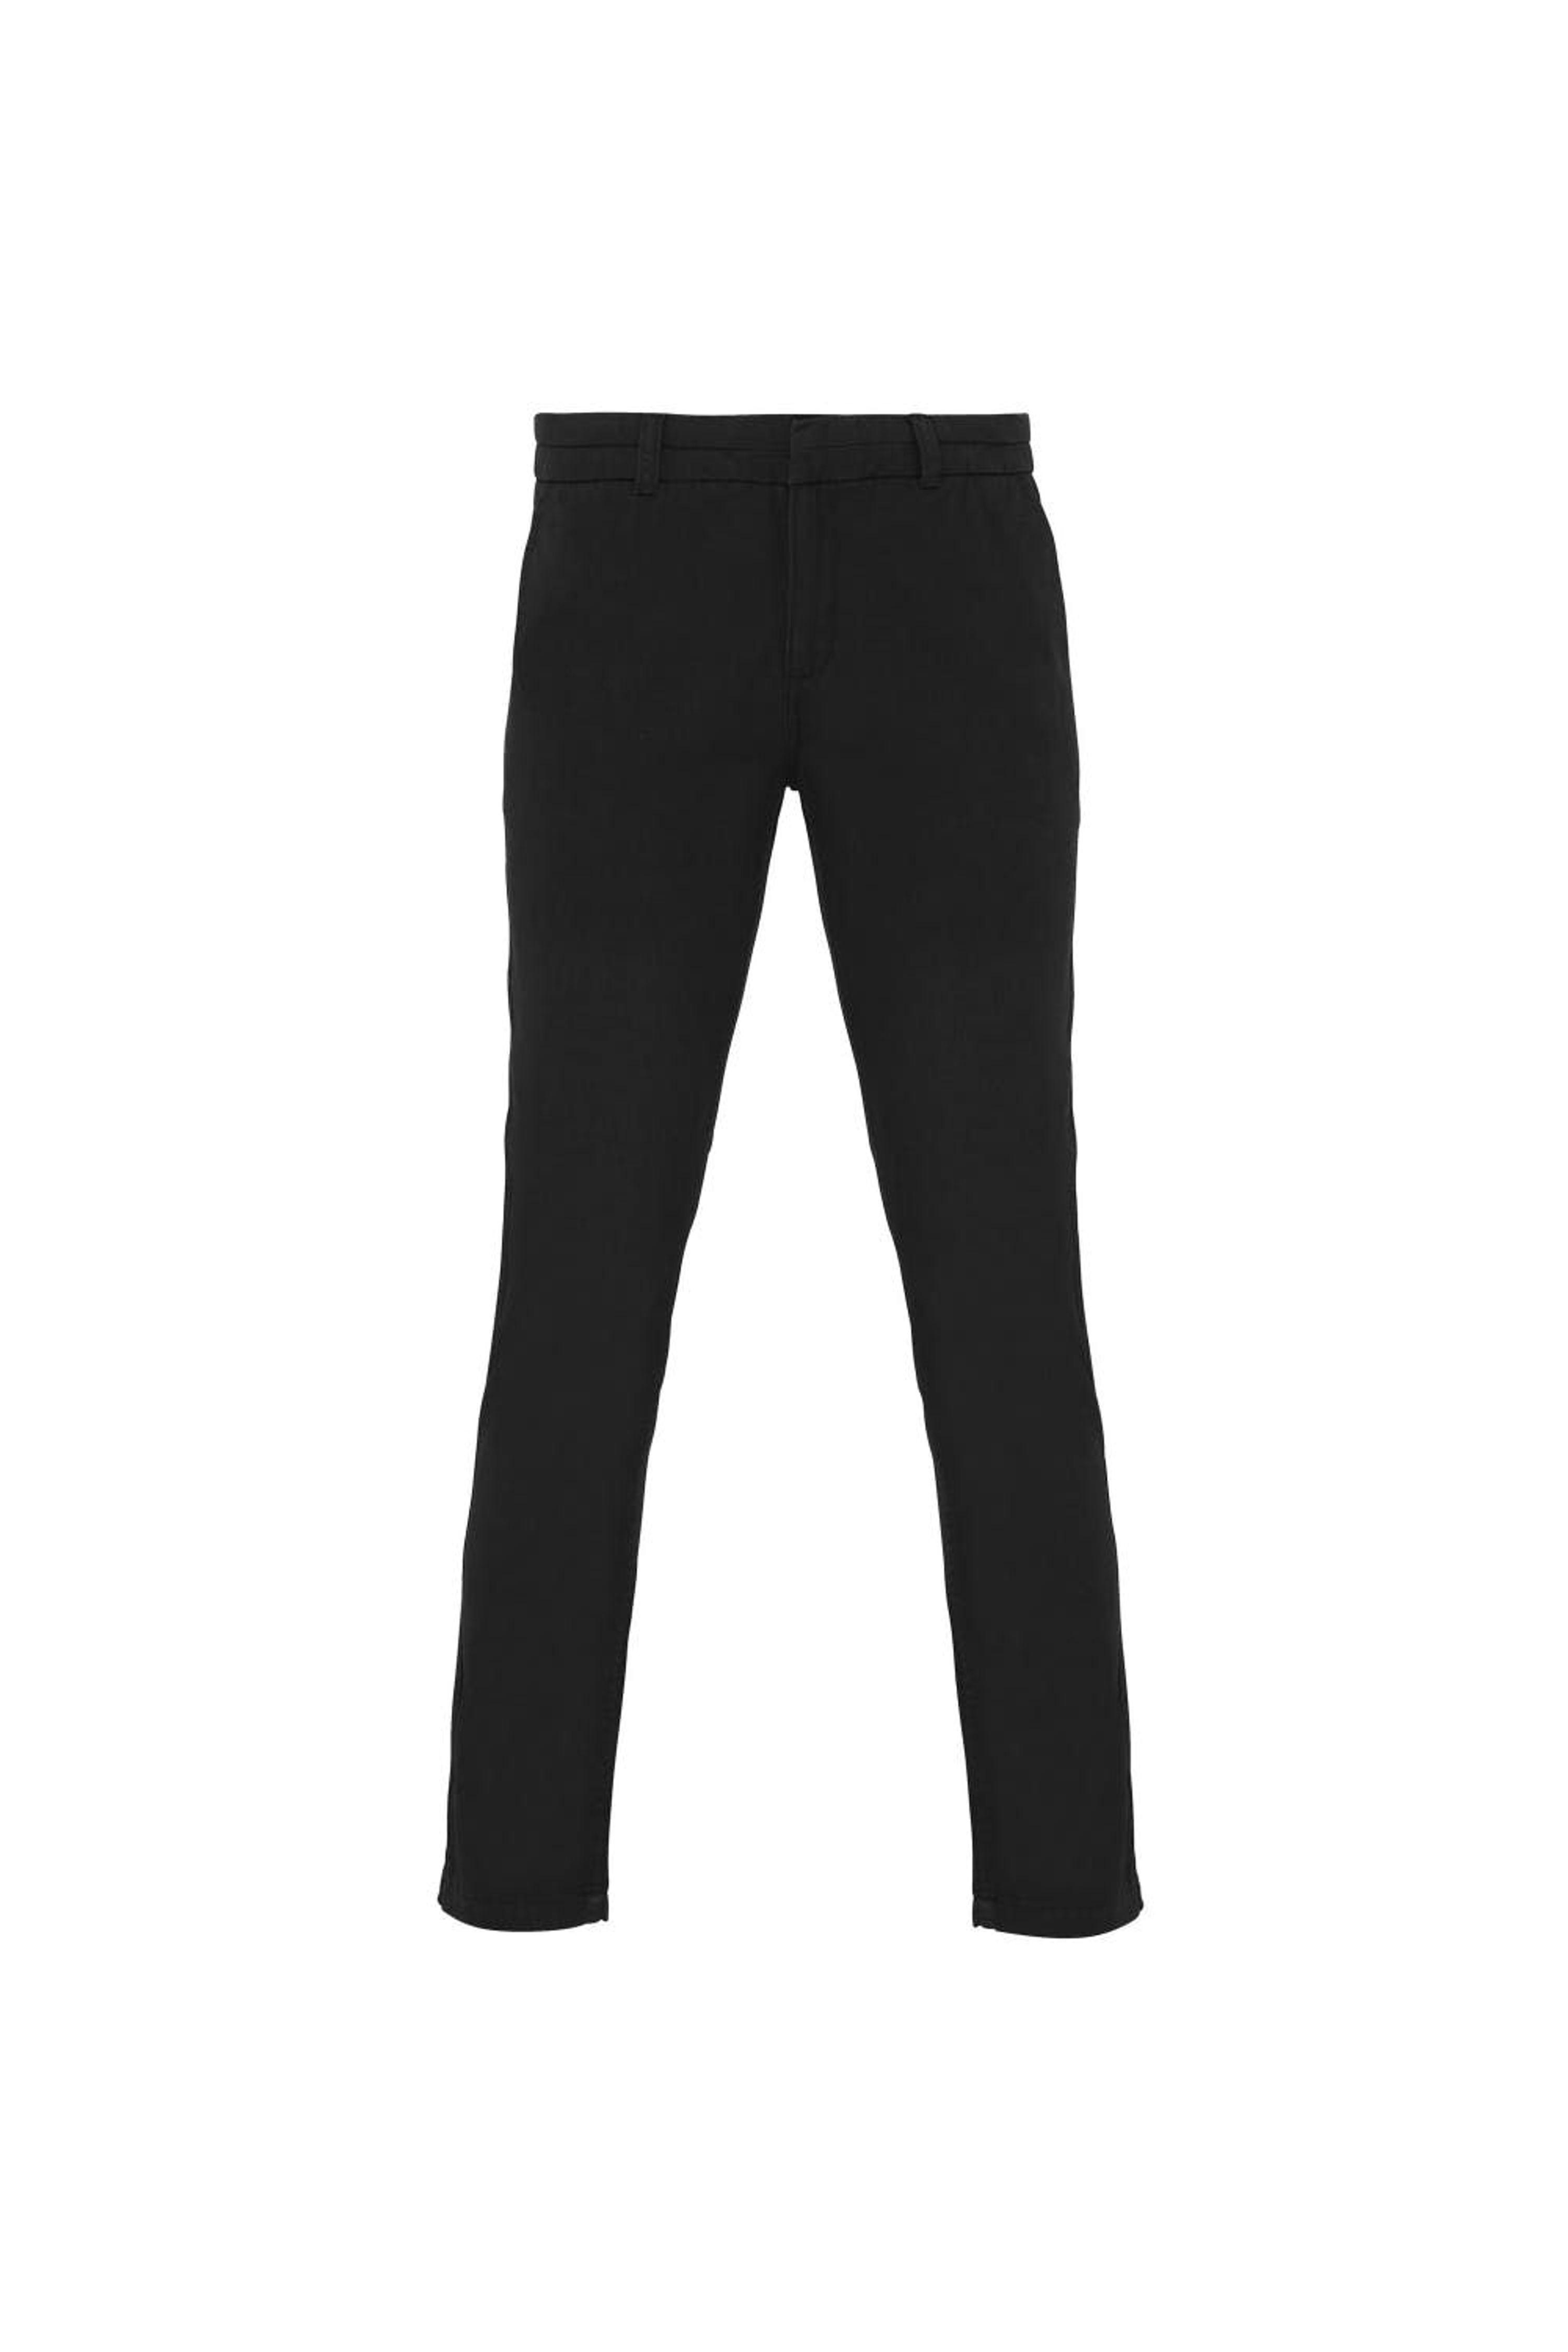 Asquith & Fox Casual Chino Trousers in Black | Lyst